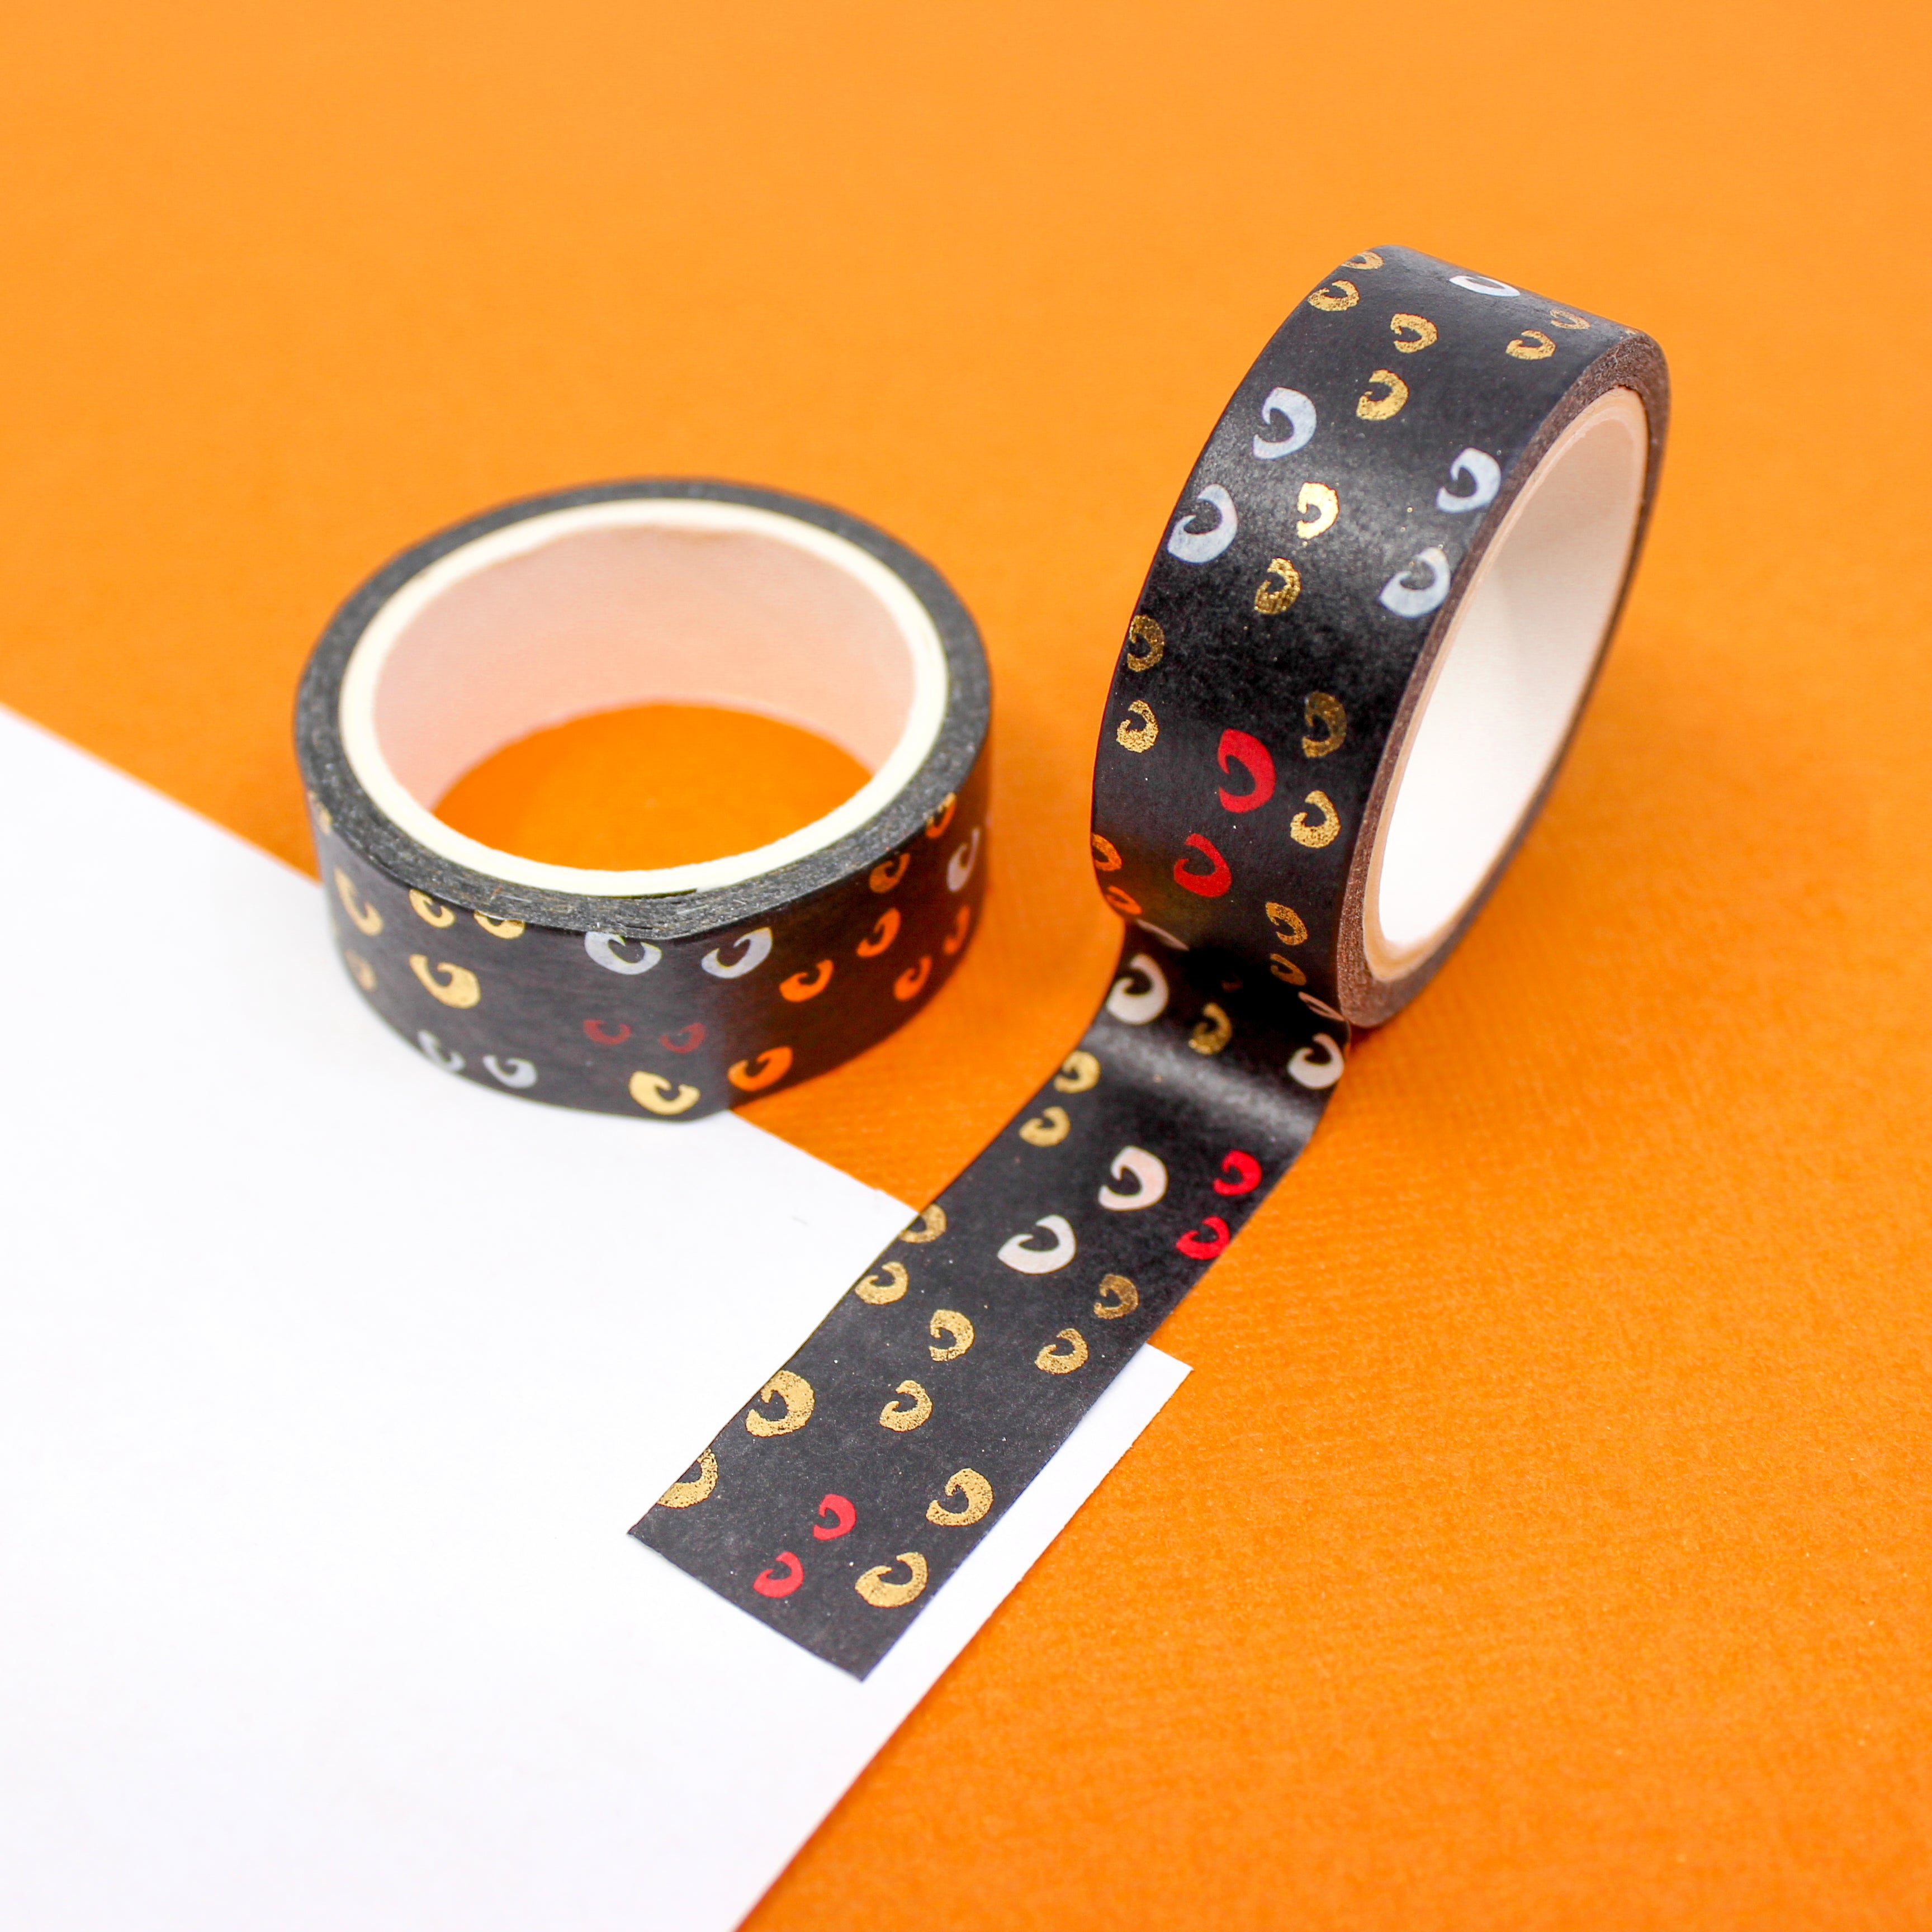 This is an eyes in the dark washi tape from BBB Supplies Craft Shop